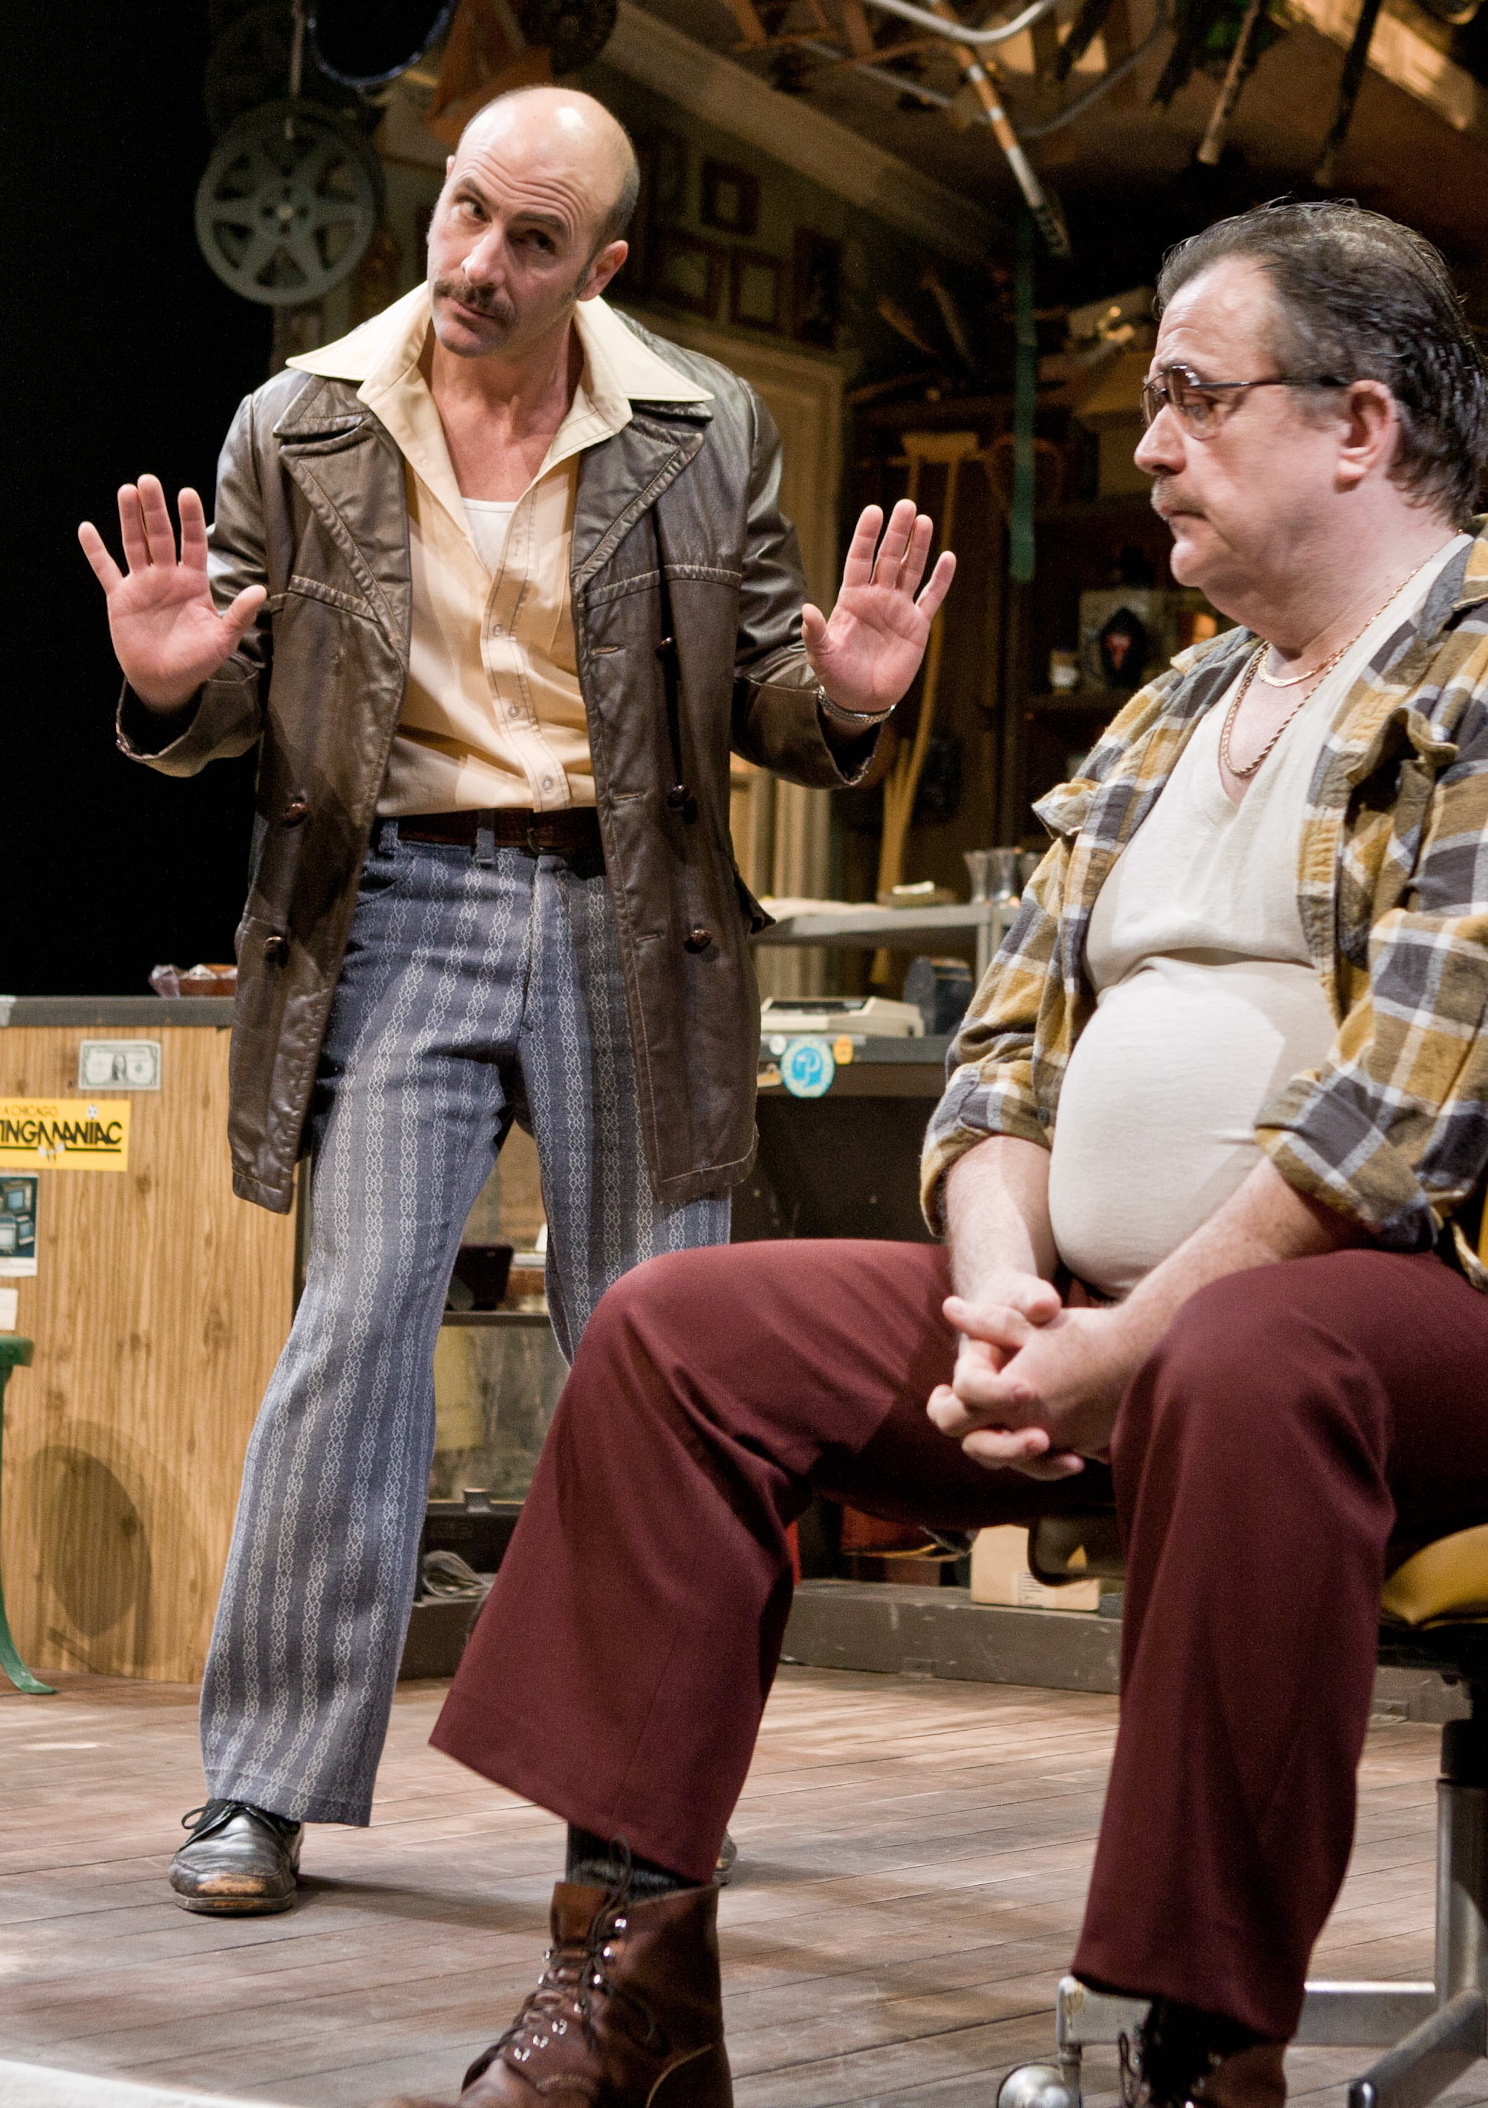 Jordan Lage as Teach w/ William Hill as Donny in David Mamet's AMERICAN BUFFALO at Baltimore's CenterStage Theater (2011).